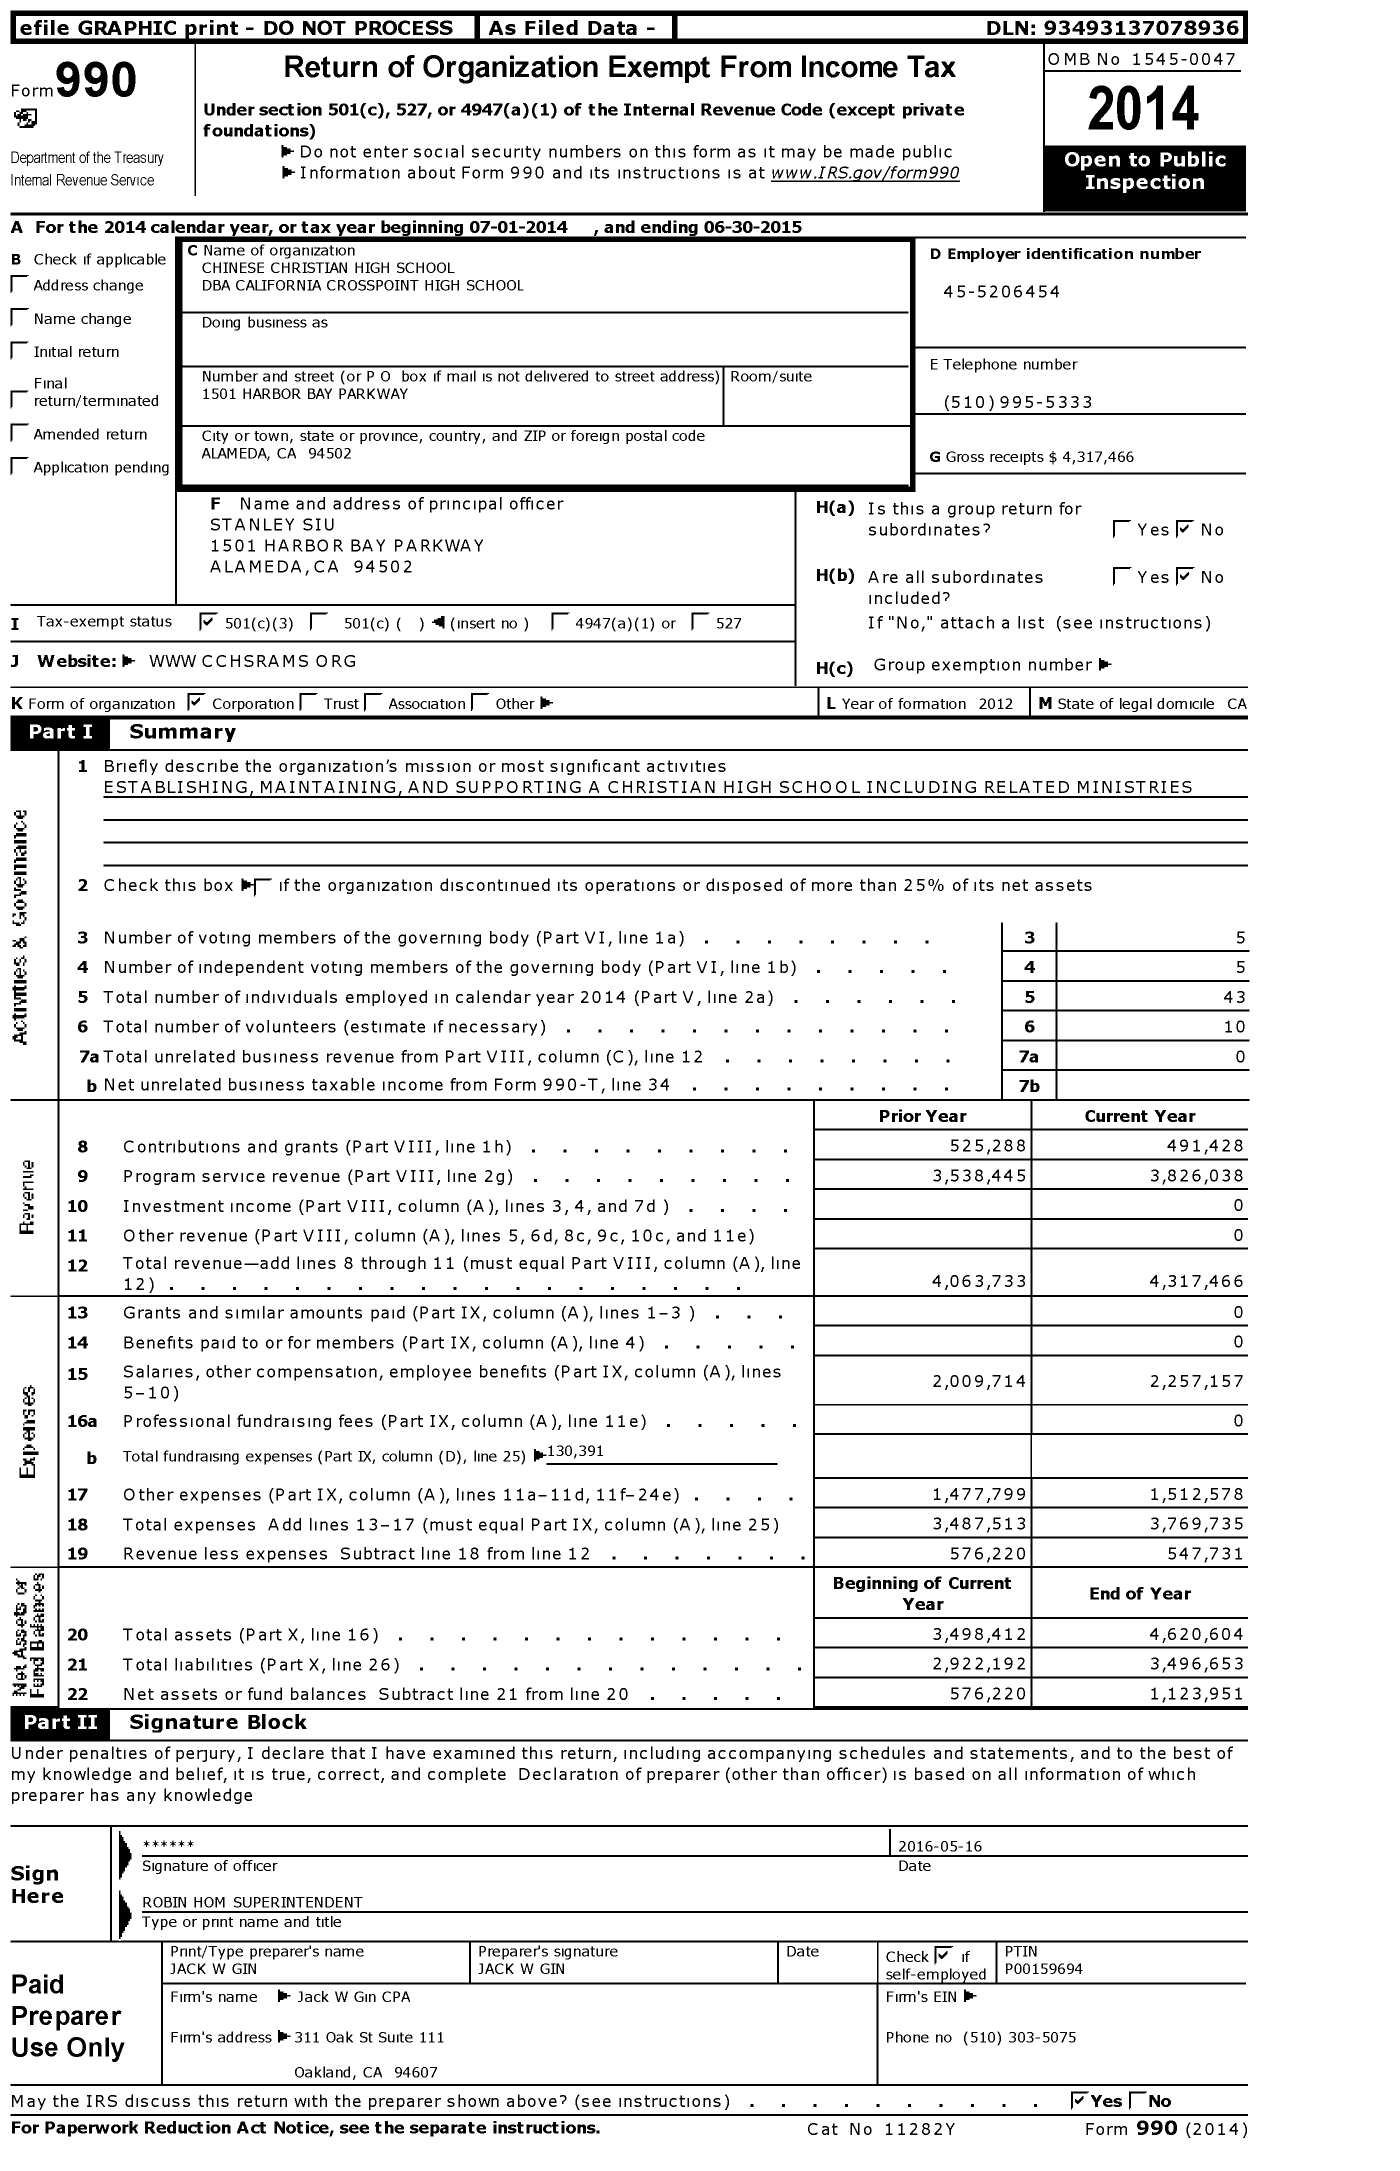 Image of first page of 2014 Form 990 for California Crosspoint High School California Crosspoint Academy (CCHS)